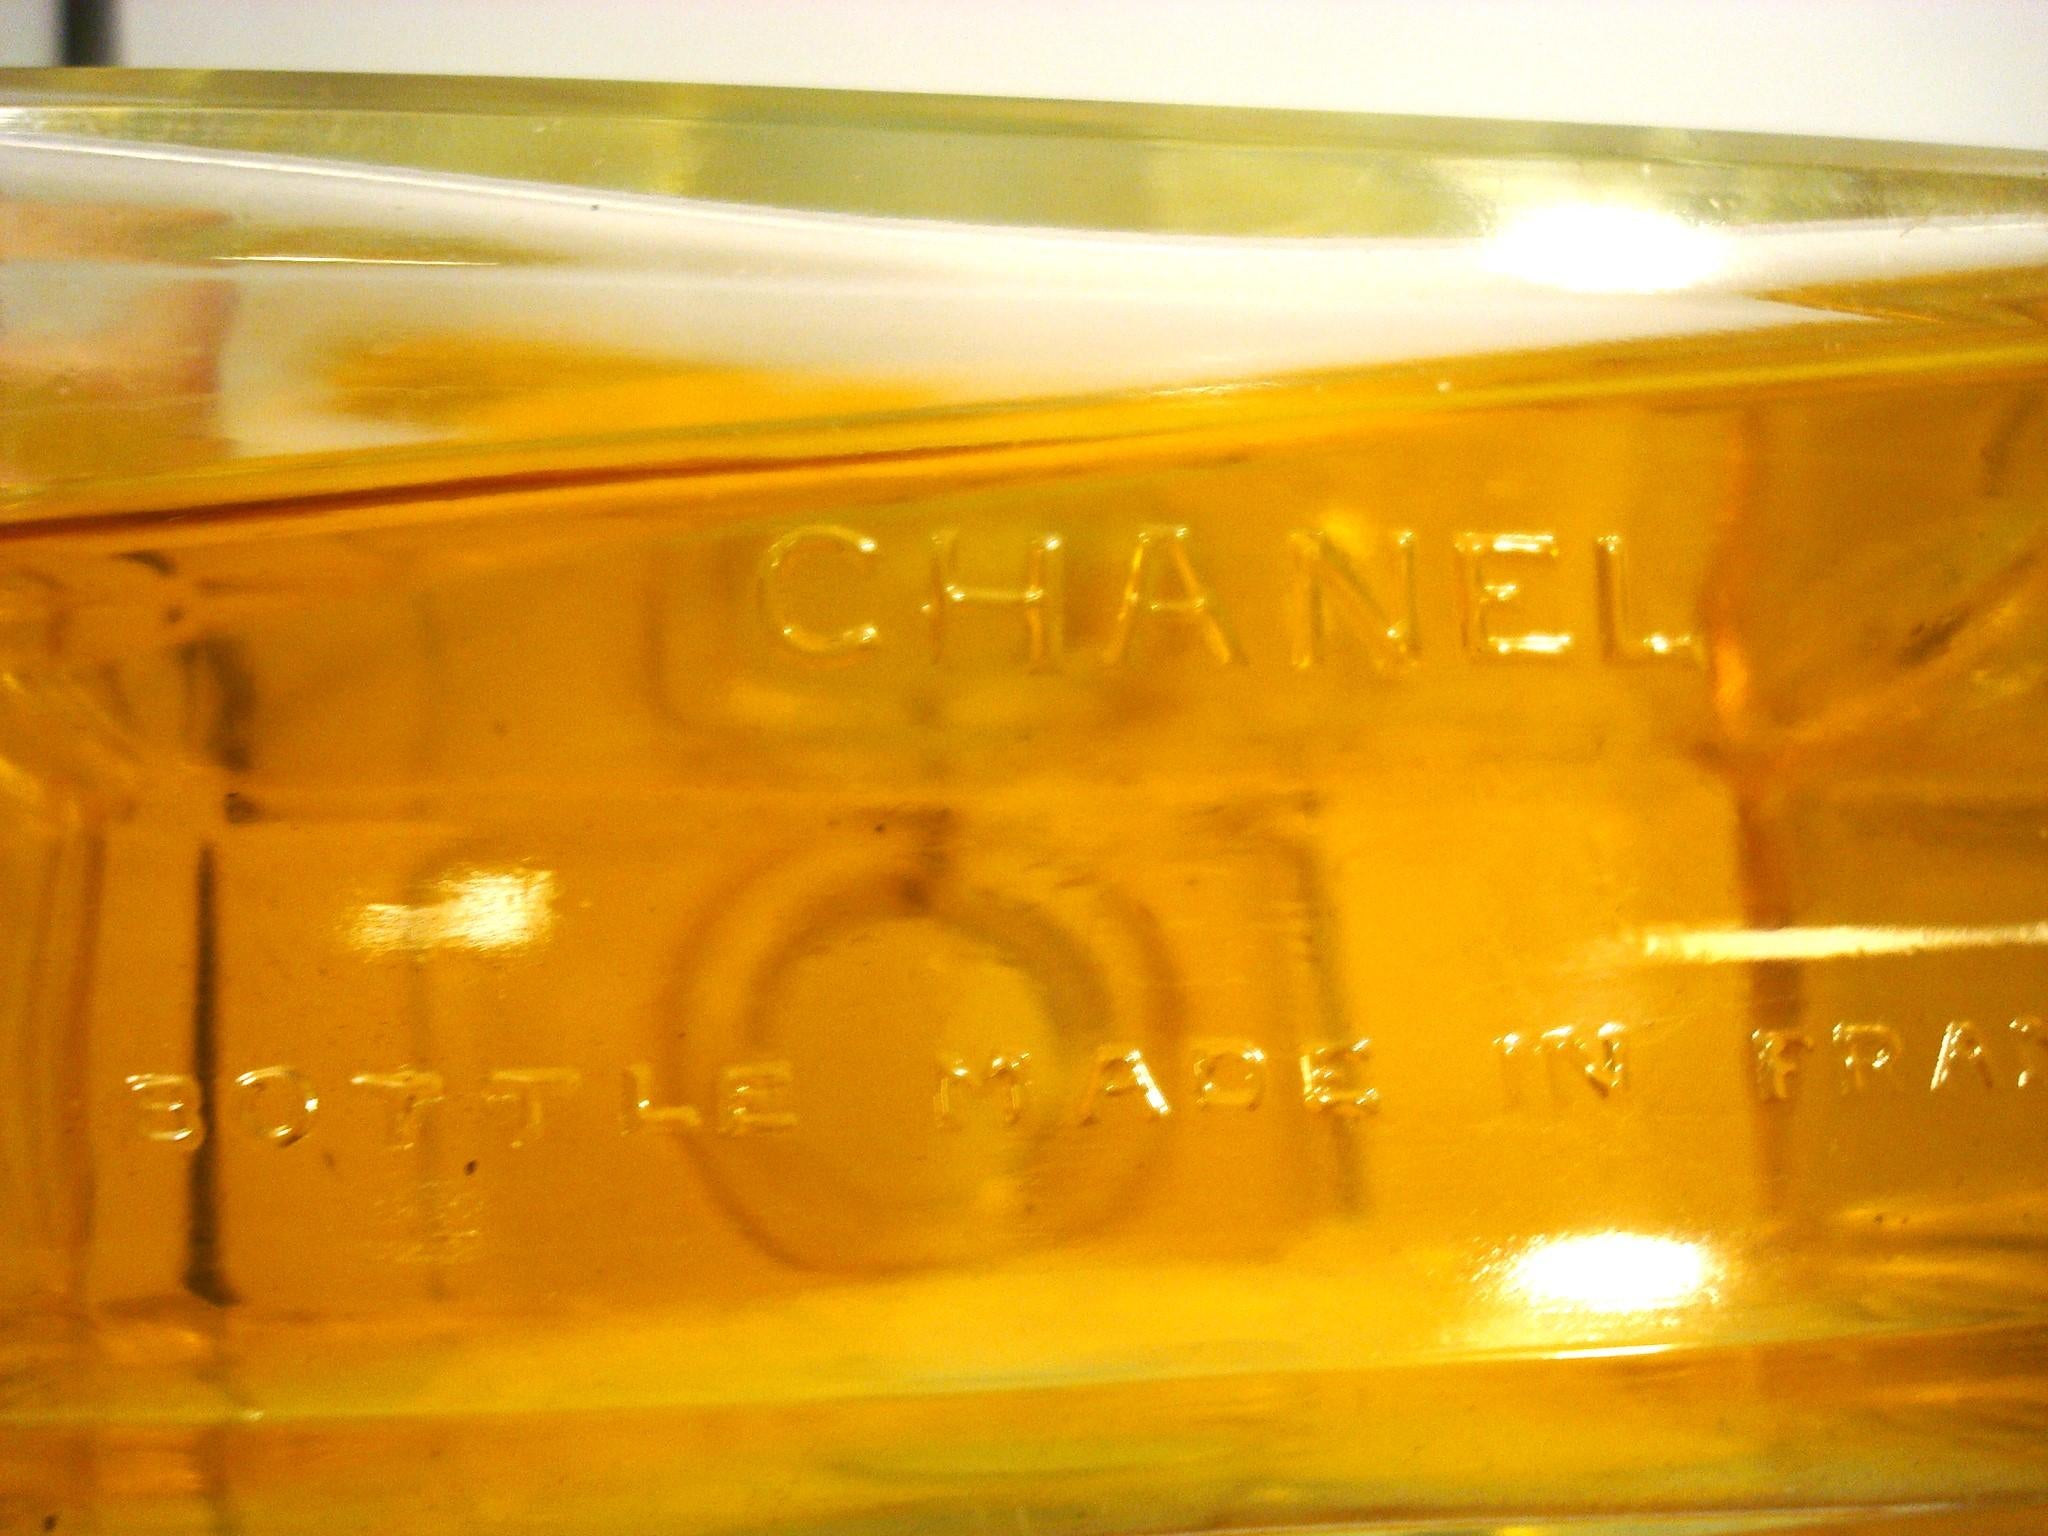 Chanel N5 Huge Store Display Perfume Bottle Advertising, France, 20th Century For Sale 1